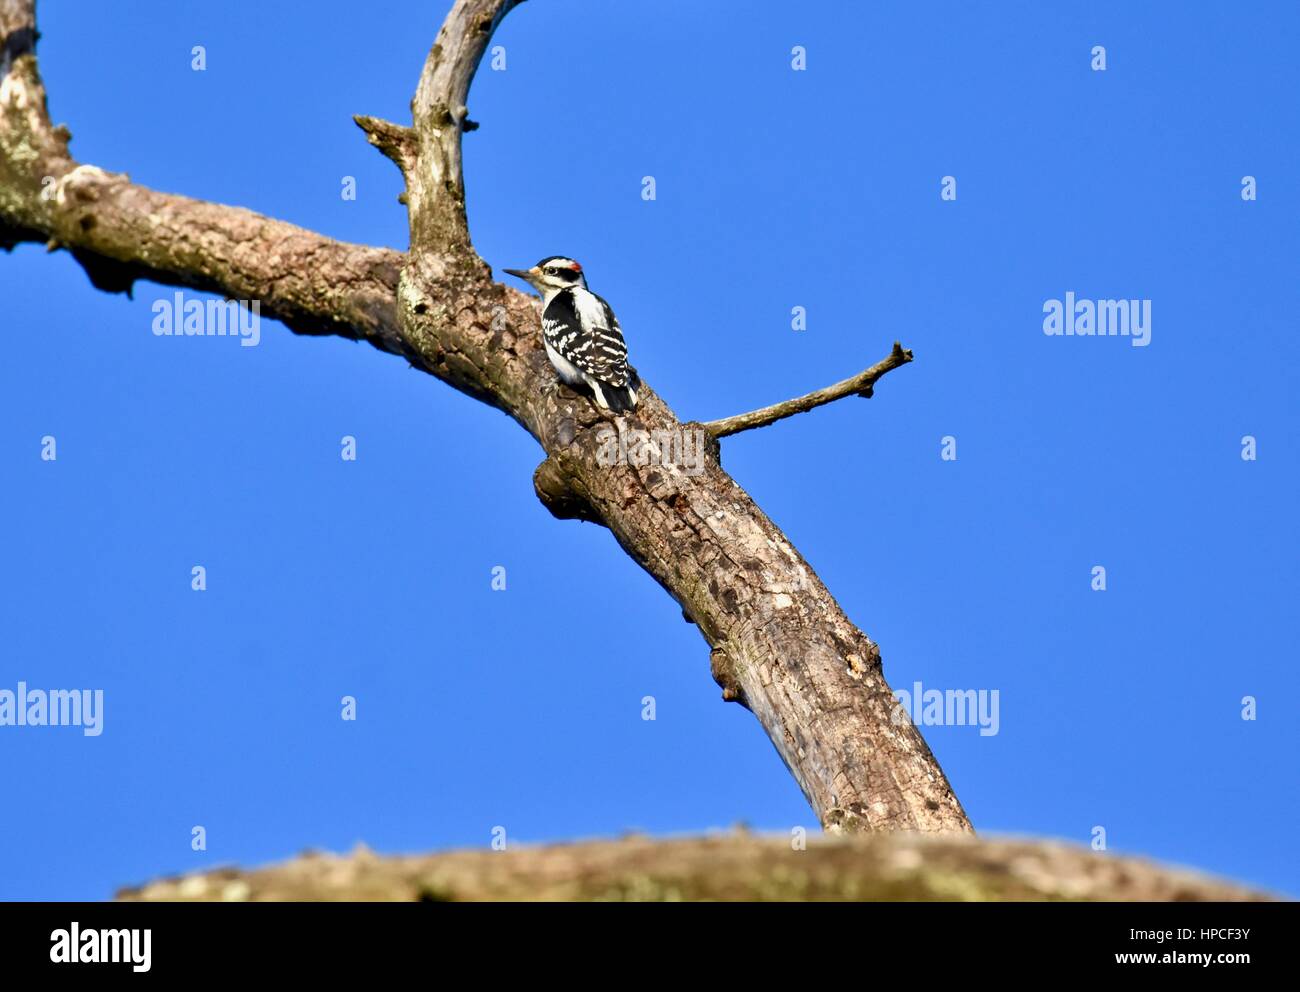 A Downy woodpecker (Picoides pubescens) perched on a tree Stock Photo